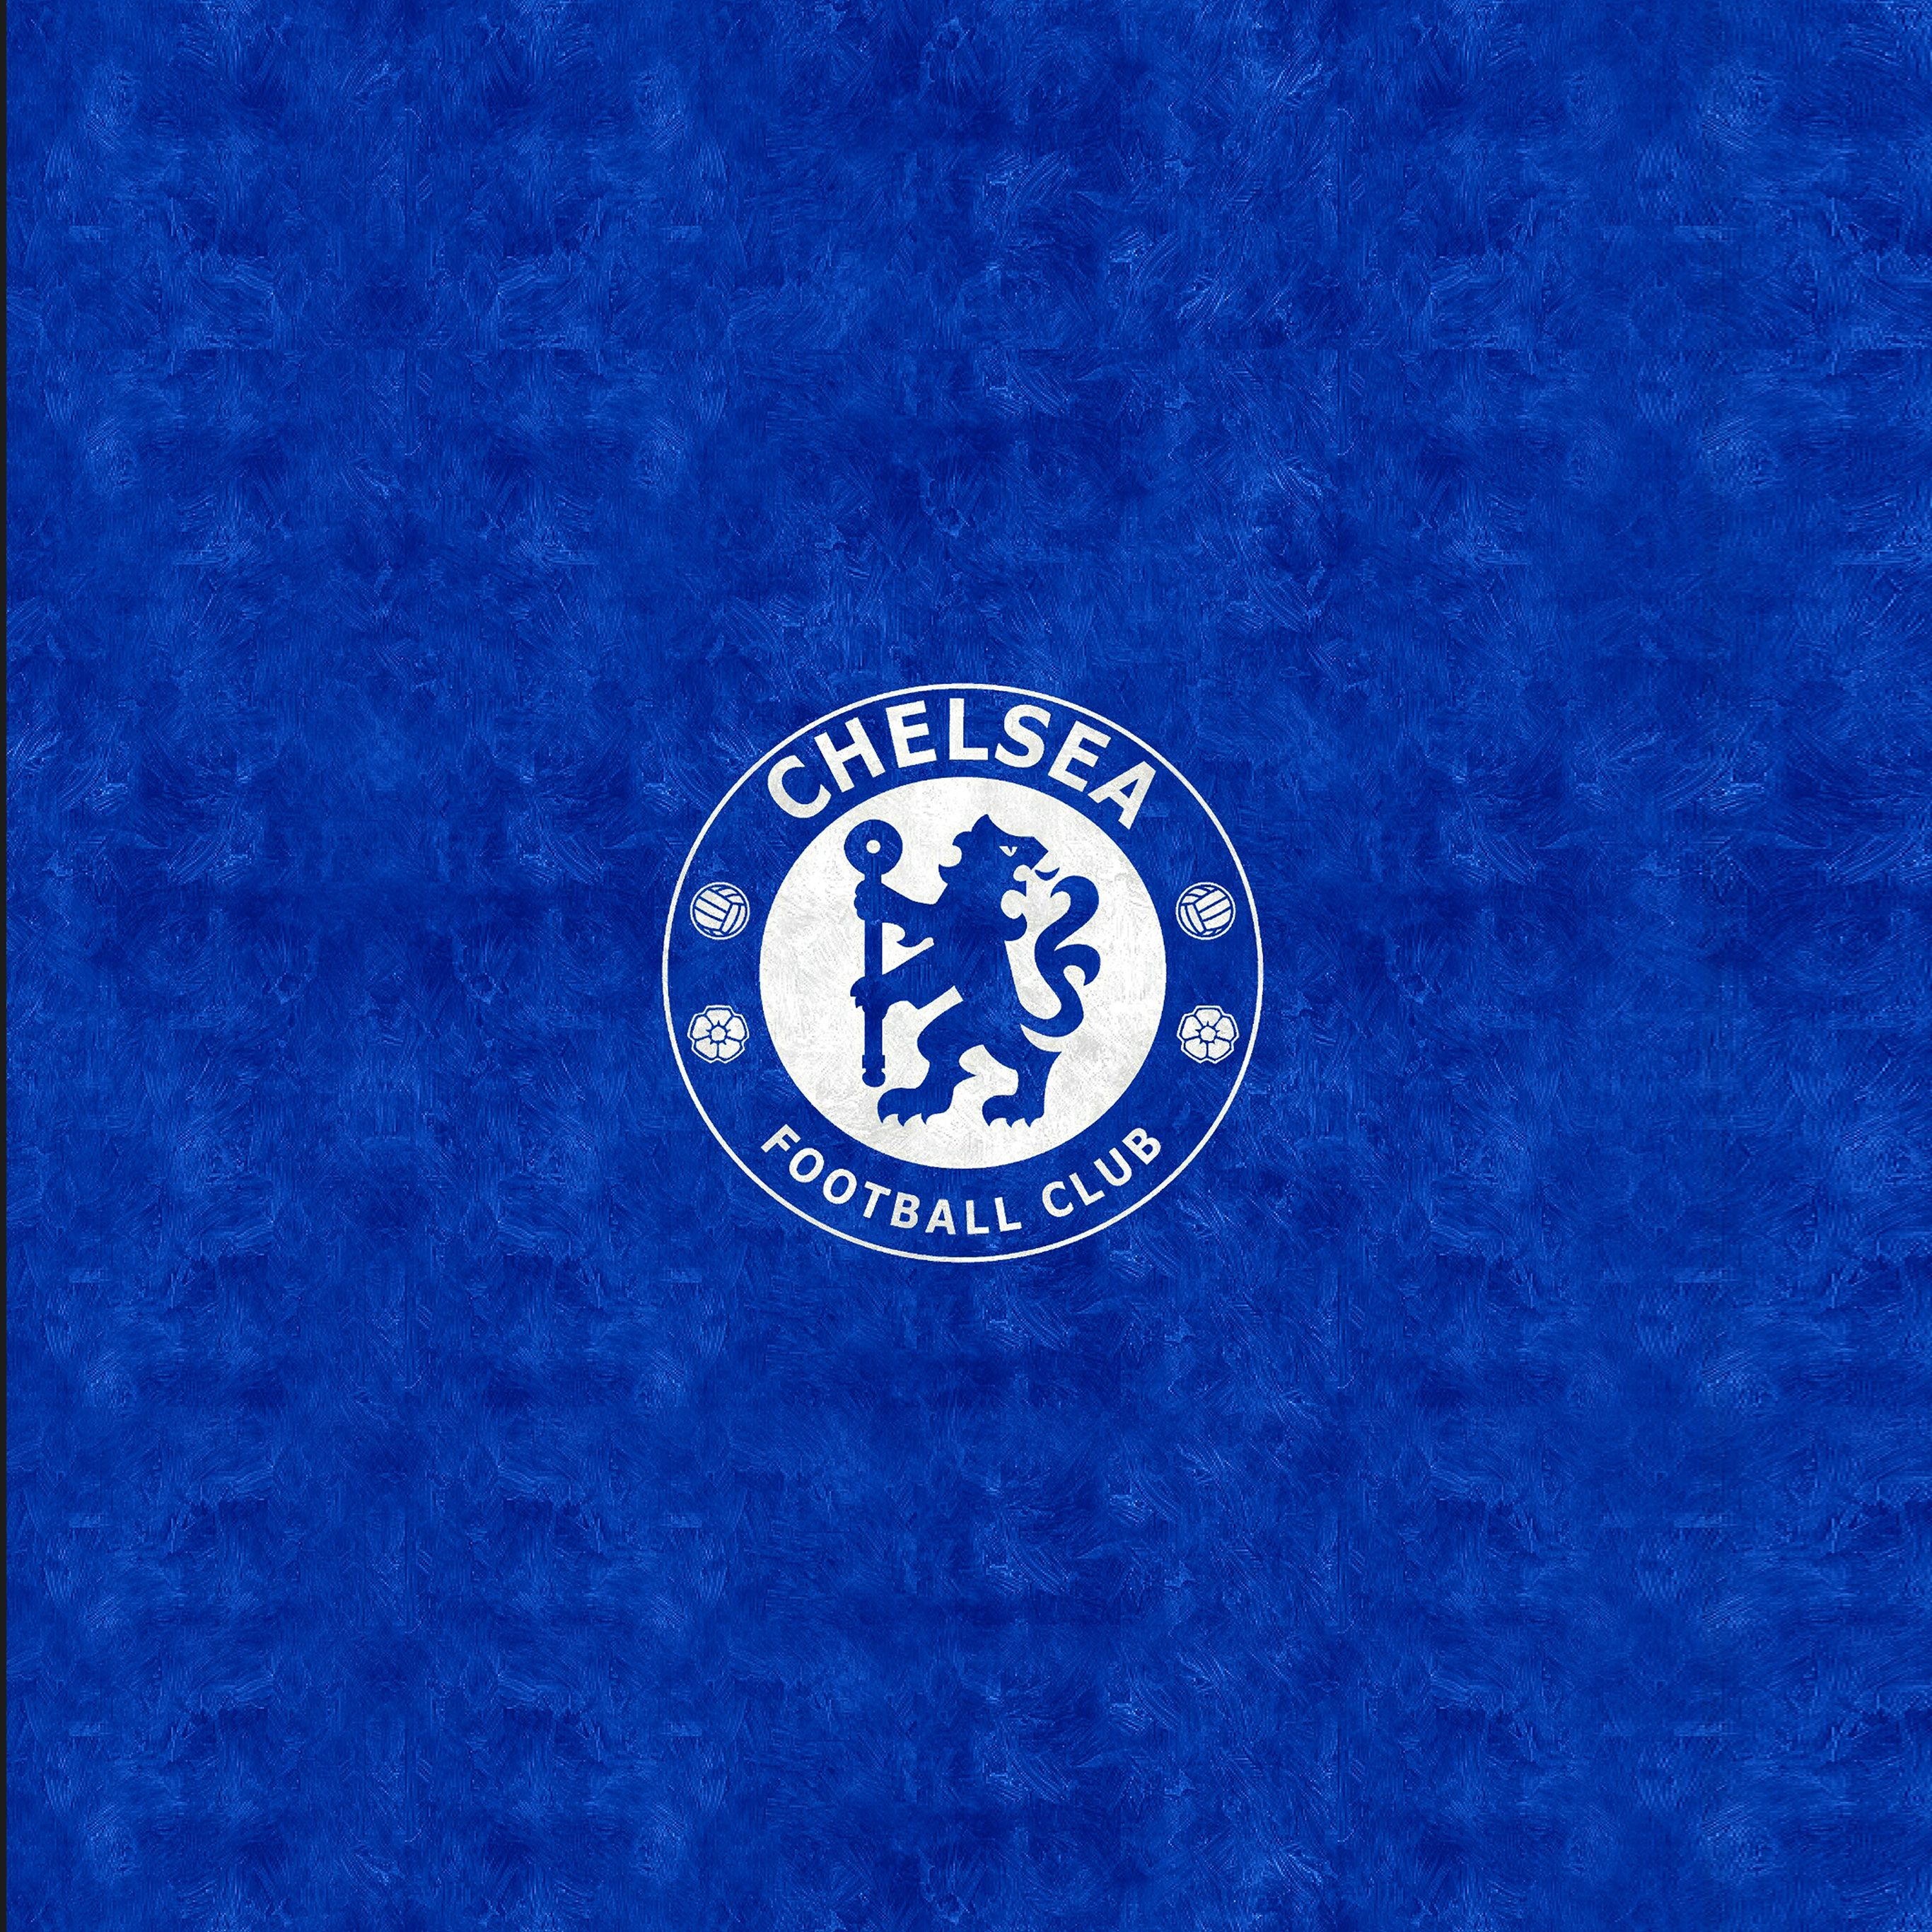 Androidpapers.co. Android wallpaper. chelsea football epl